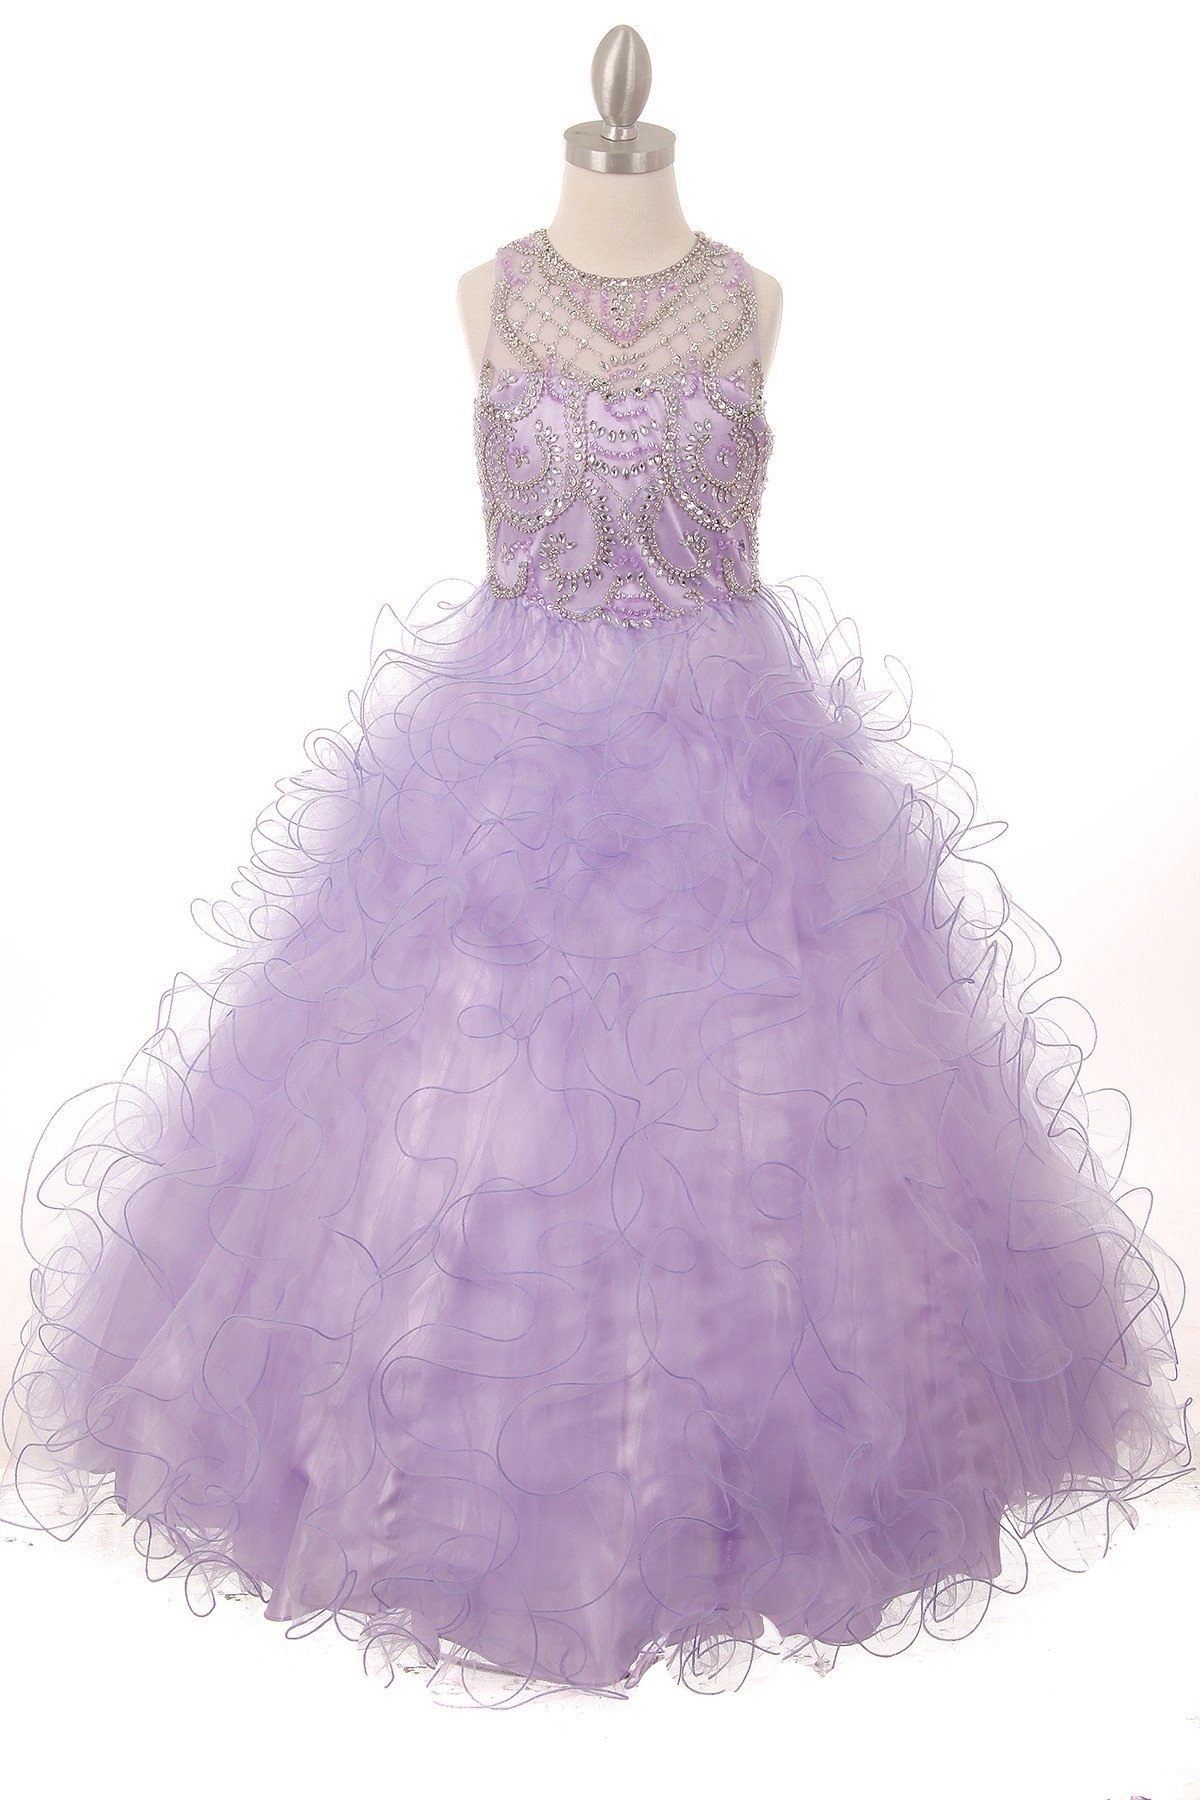 Preteen formal lilac dress with a beaded illusion neckline, tulle ruffle skirt 